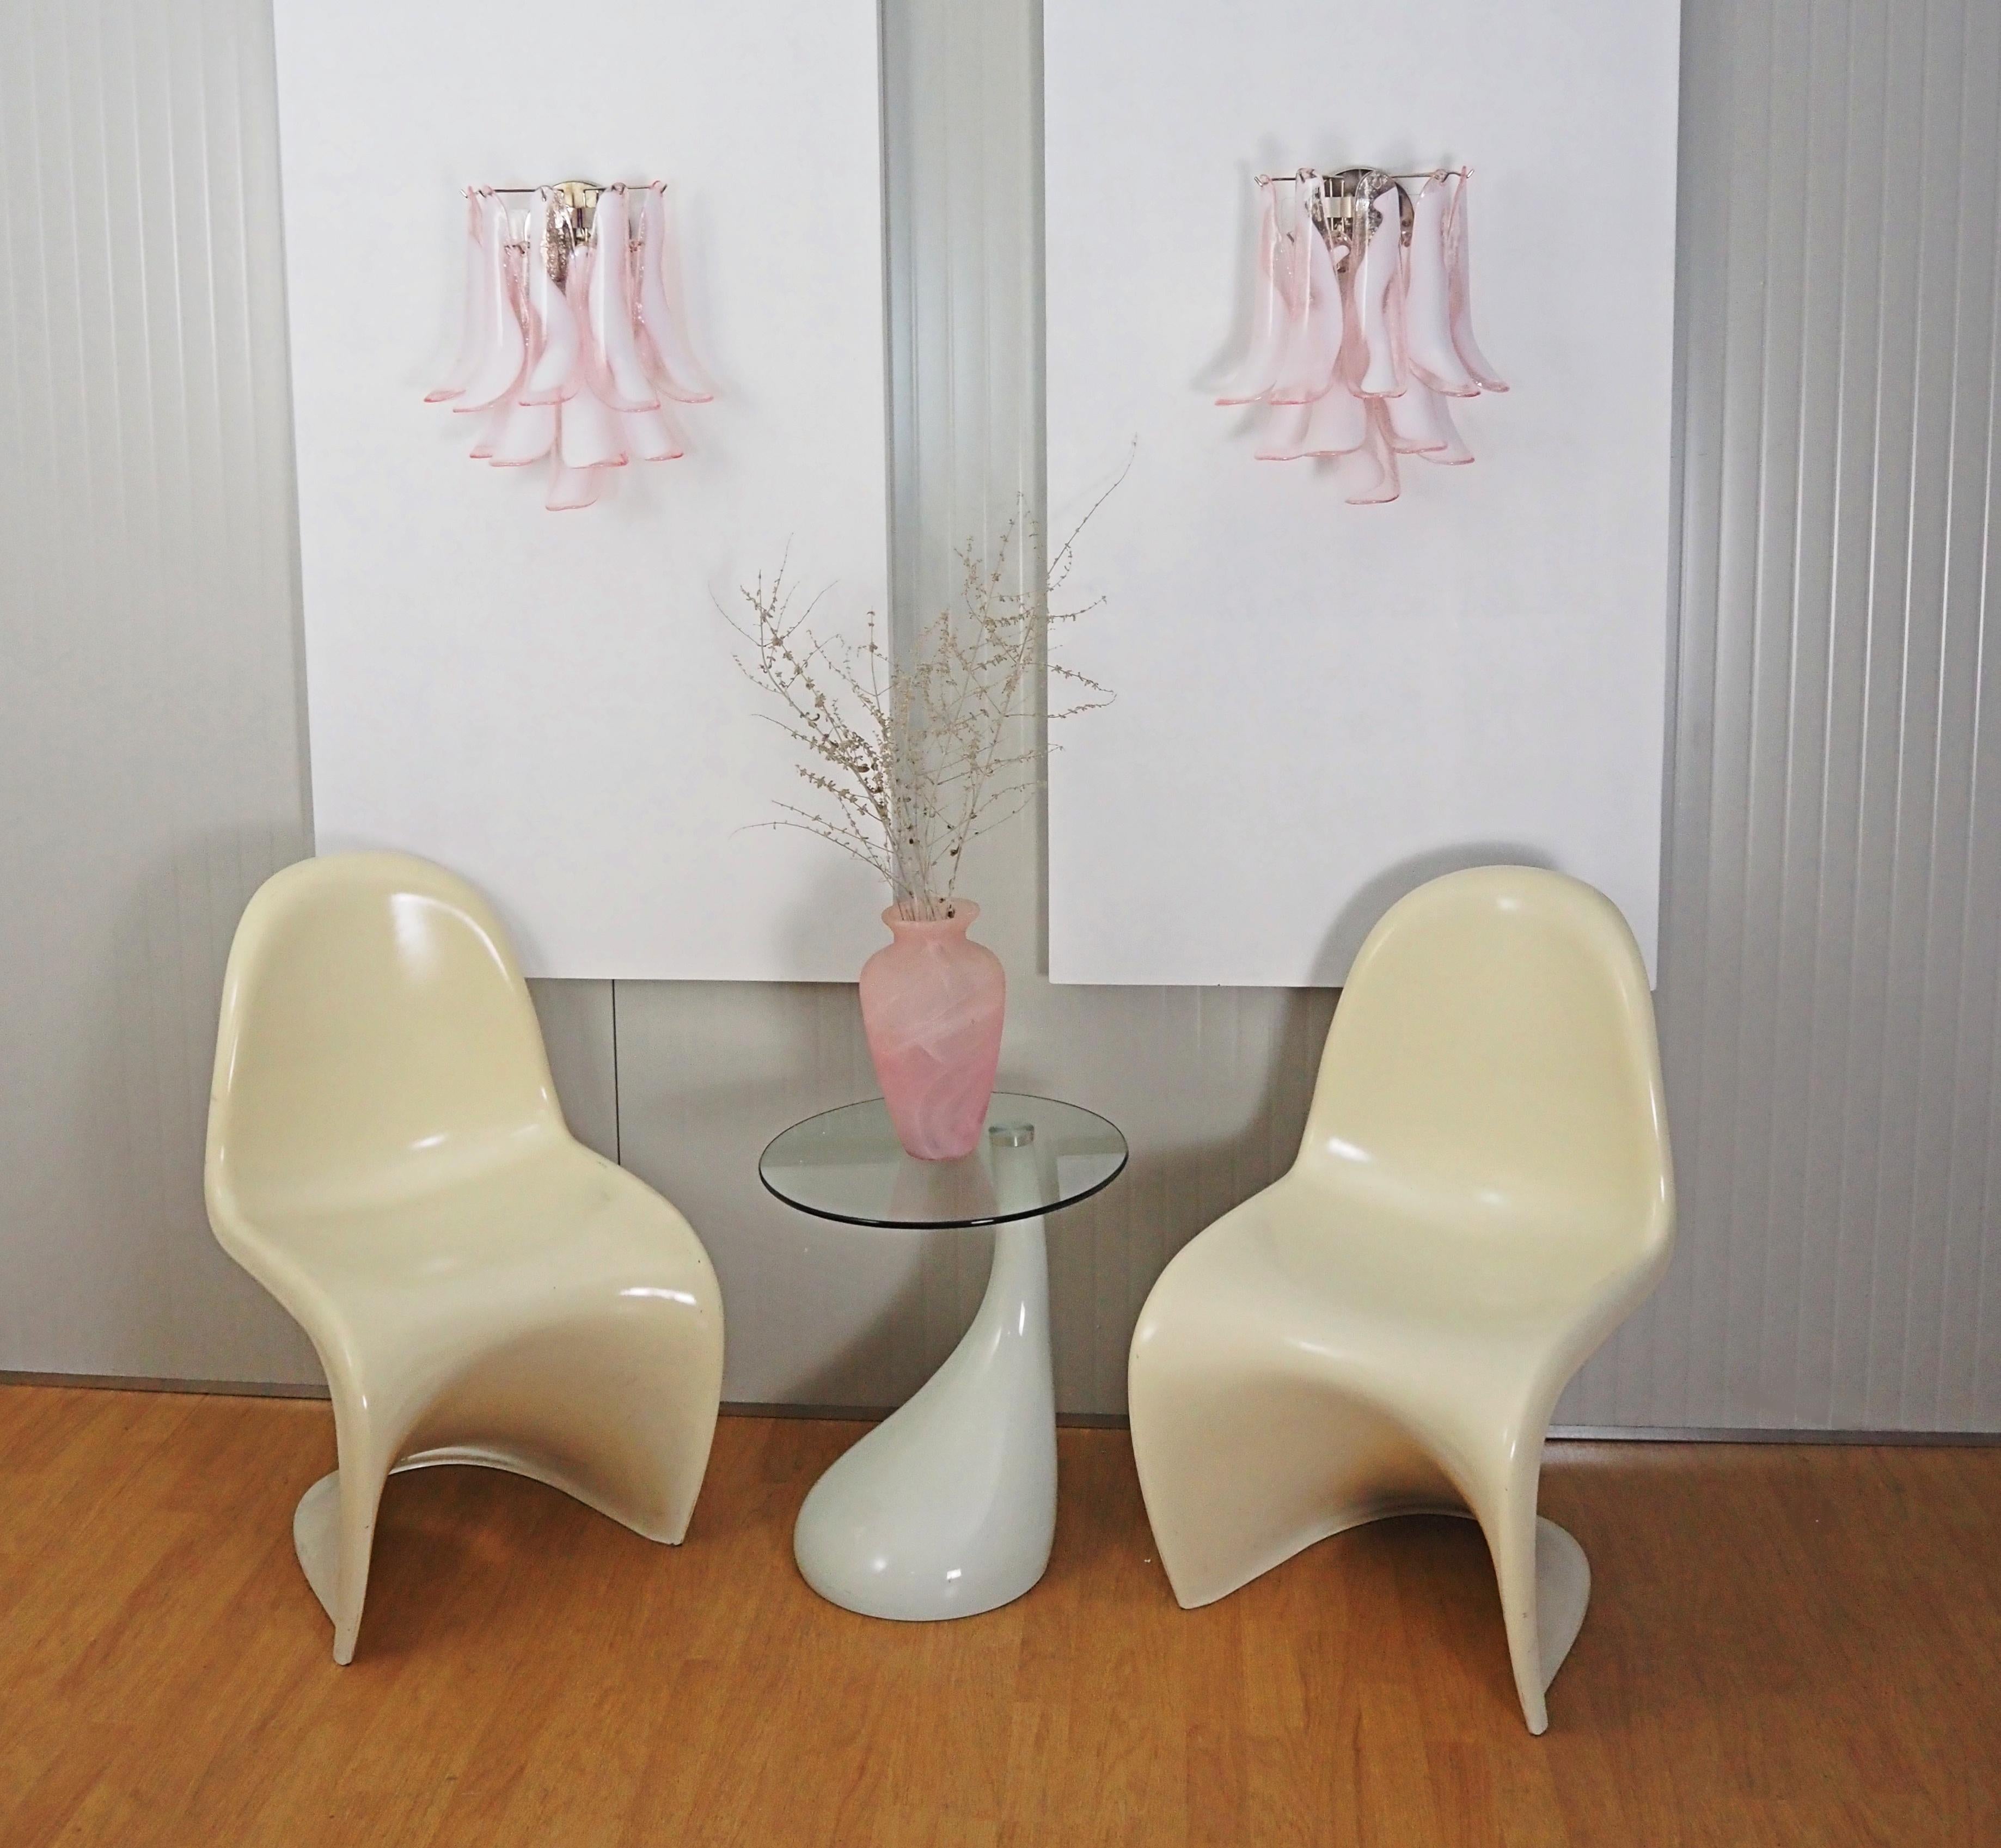 Pair of Vintage Italian Murano appliques in the manner of Mazzega . Wall lights have 10 pink and white “lattimo” glasses (for each applique) in a nickel-plated metal frame.
Period: late XX century
Dimensions: 16,50 inches (42 cm) height; 13,80